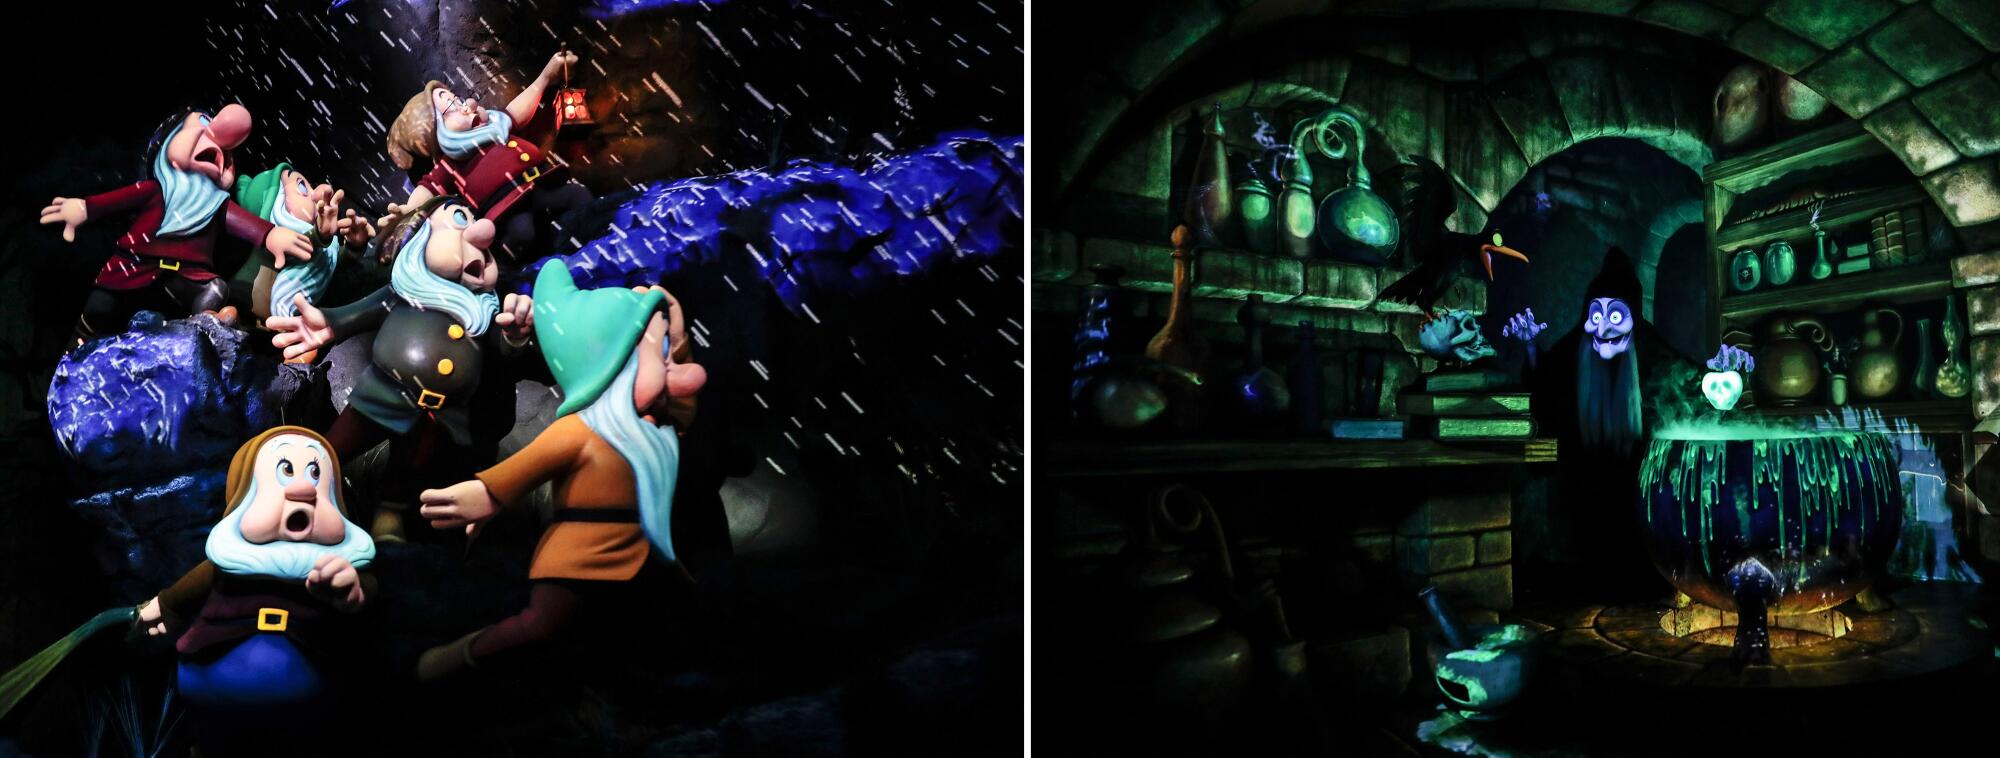 Scenes of the Seven Dwarfs, left, and of the Evil Queen in her witch's nest